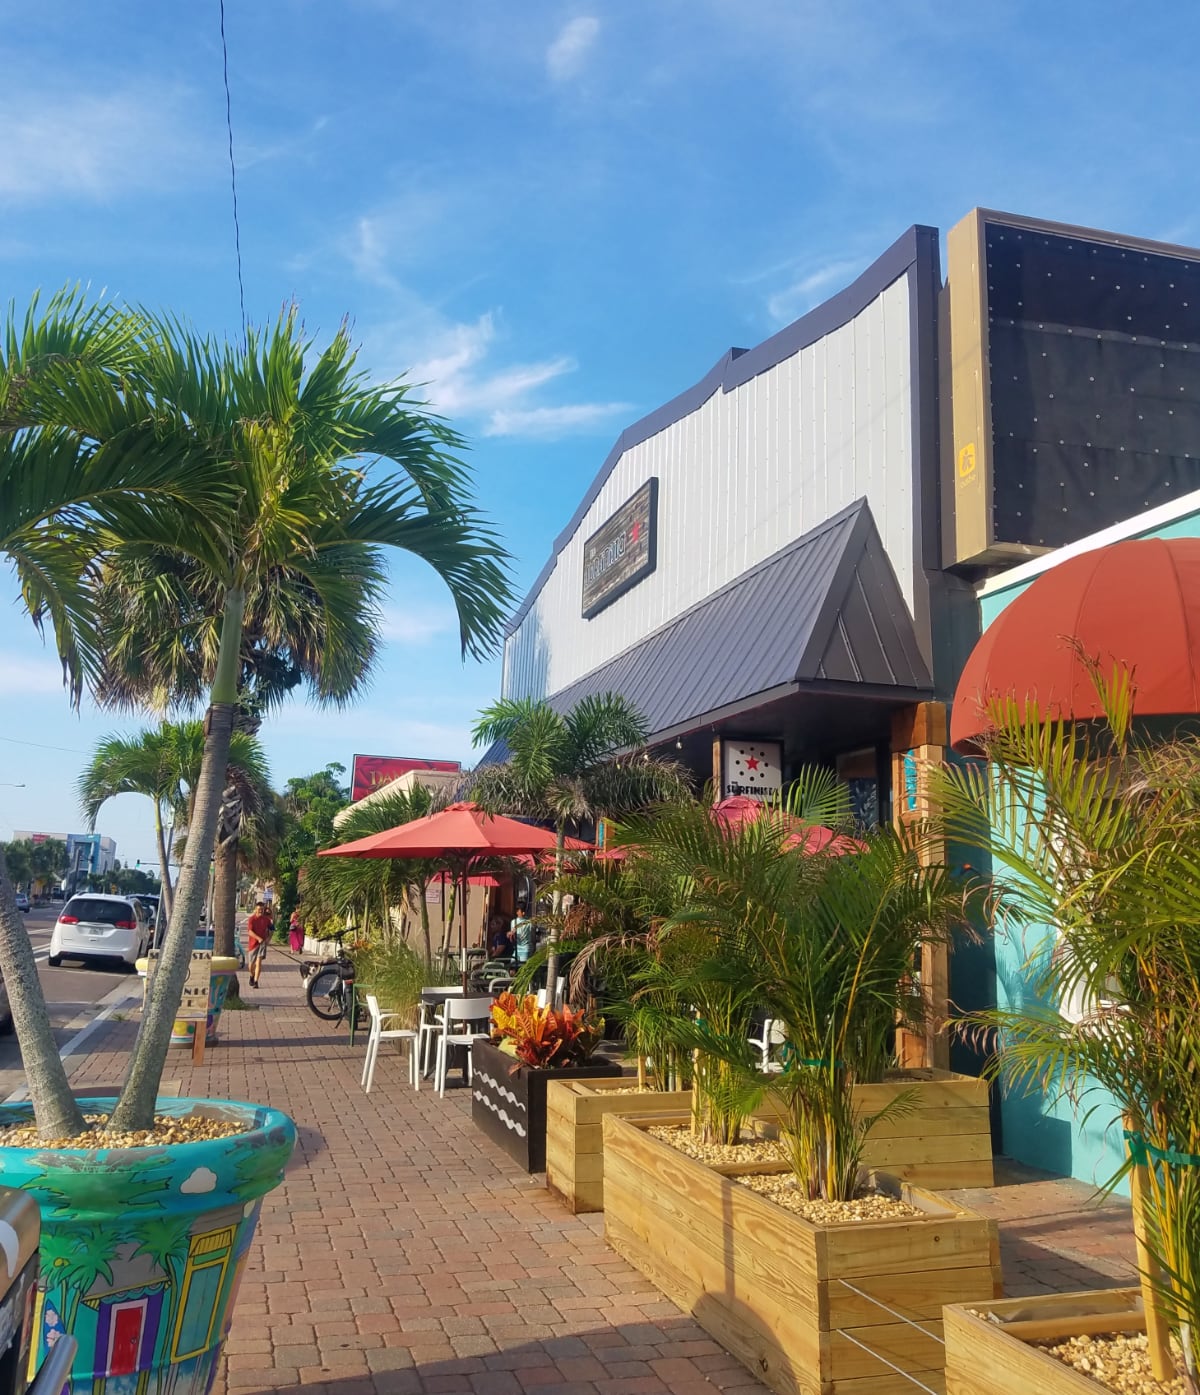 Cafe Surfinista downtown Cocoa Beach